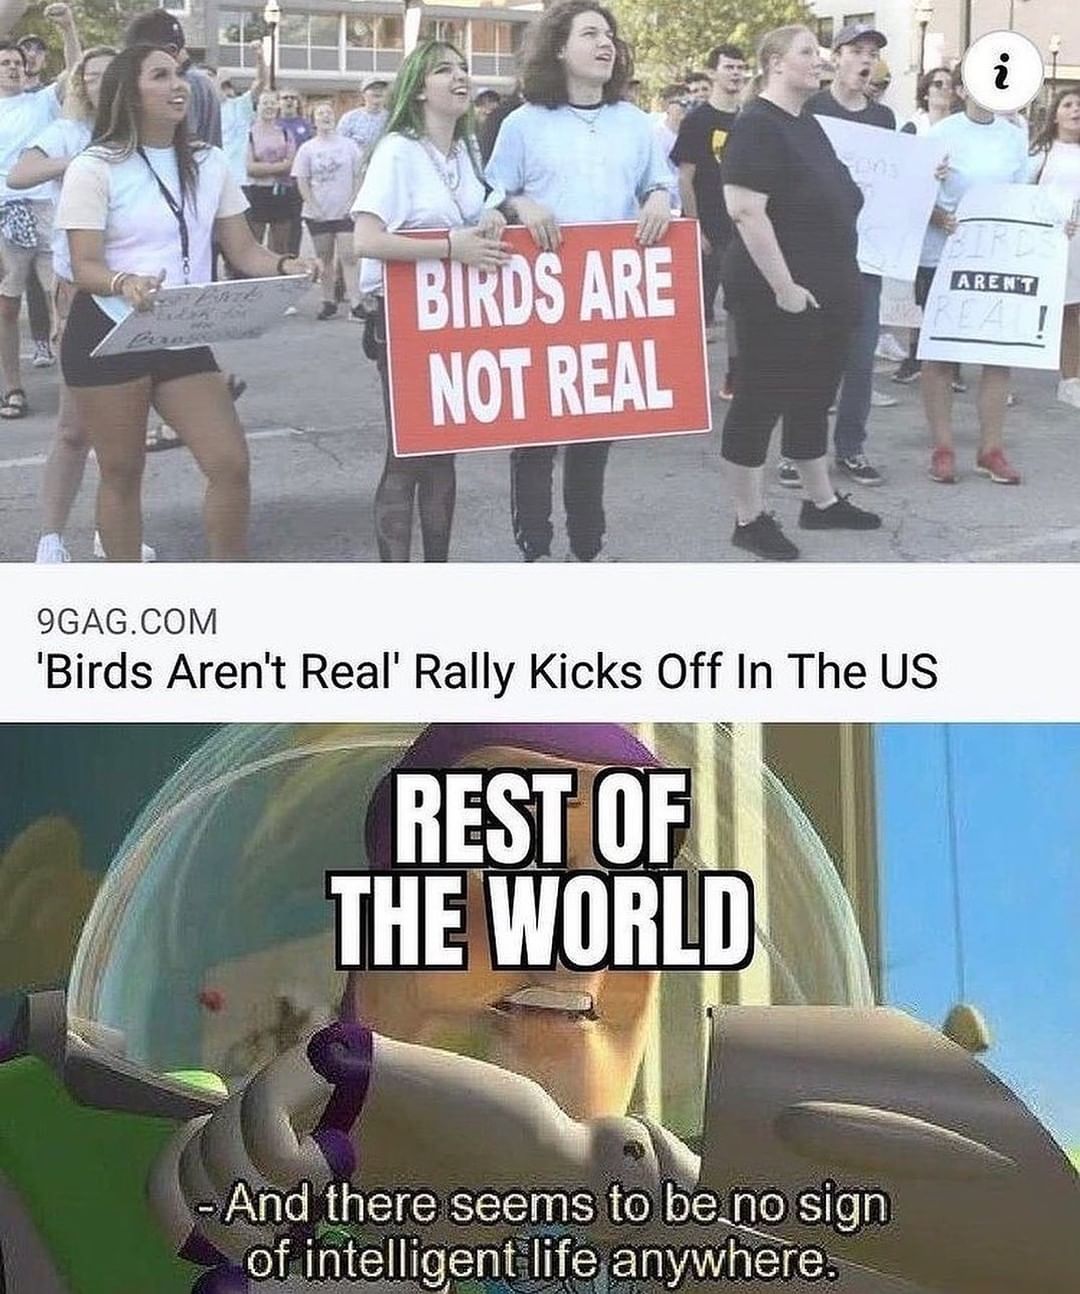 Birds Are Not Real Birds Arent Real Rally Kicks Off In The Us Rest Of The World And There